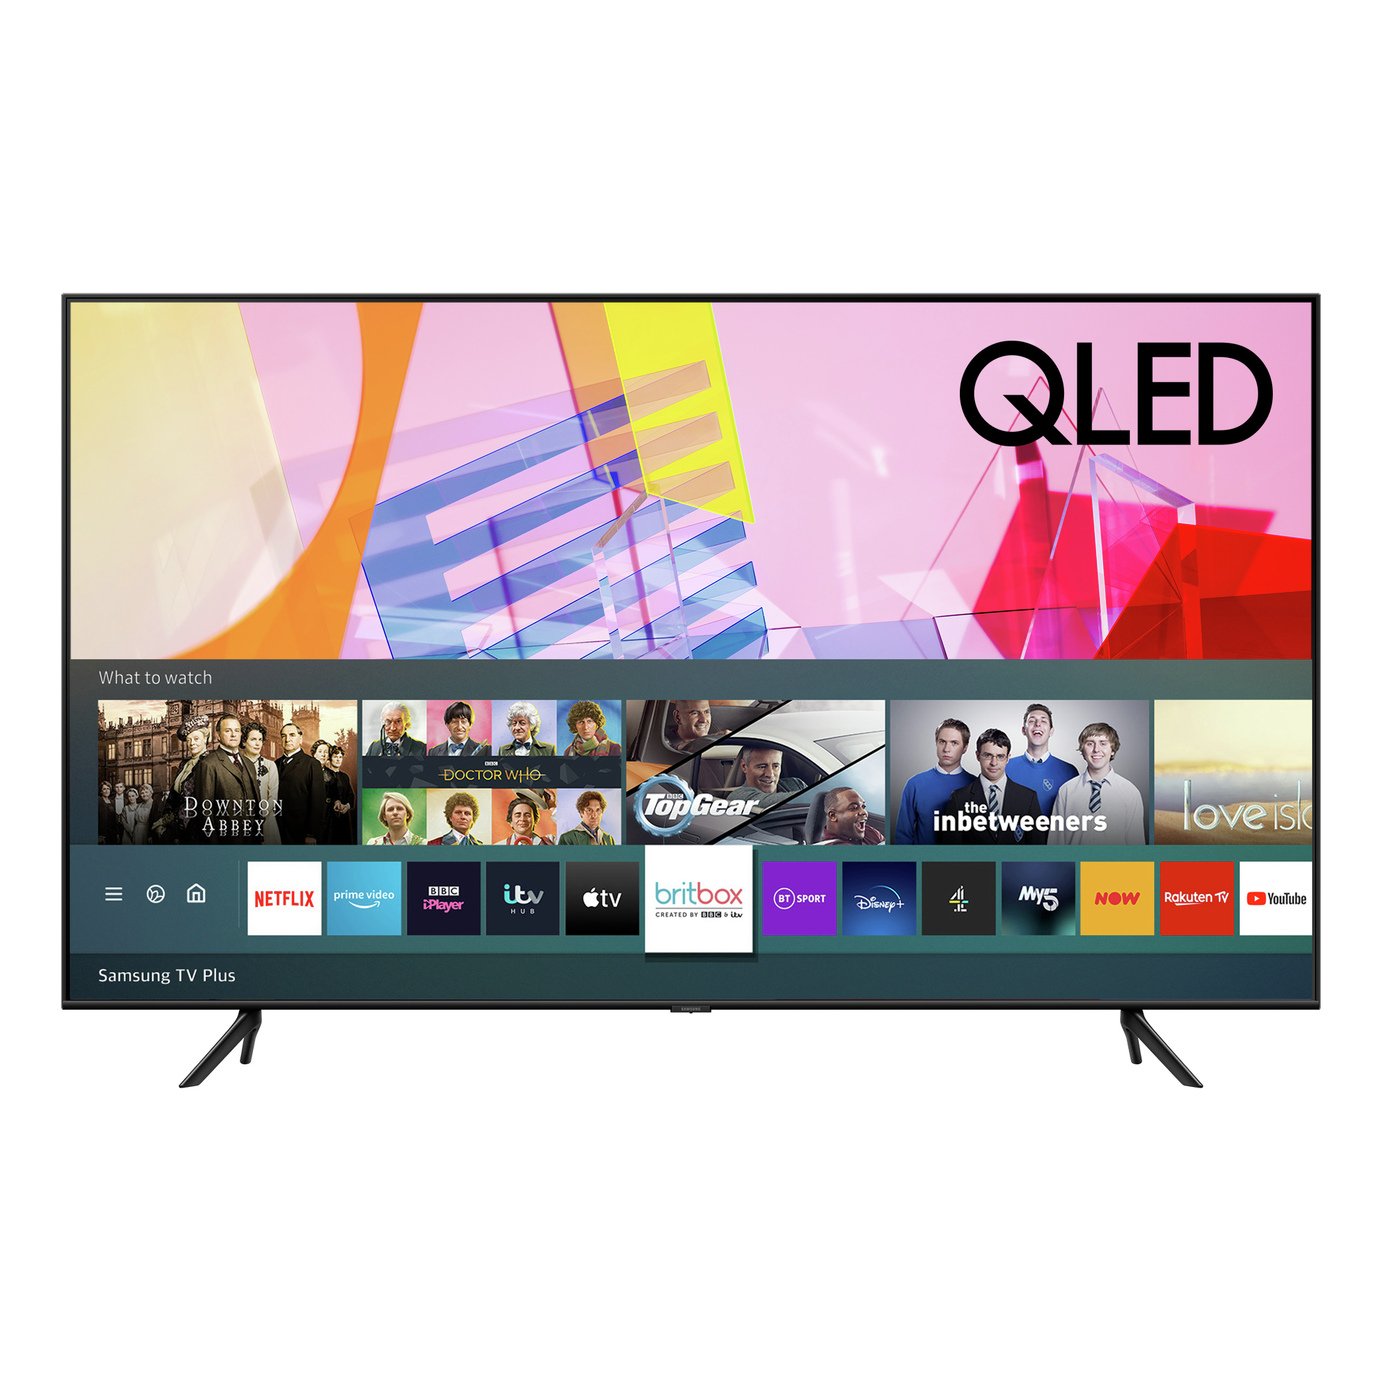 Samsung 65 Inch QE65Q60T Ultra HD QLED TV with HDR Review